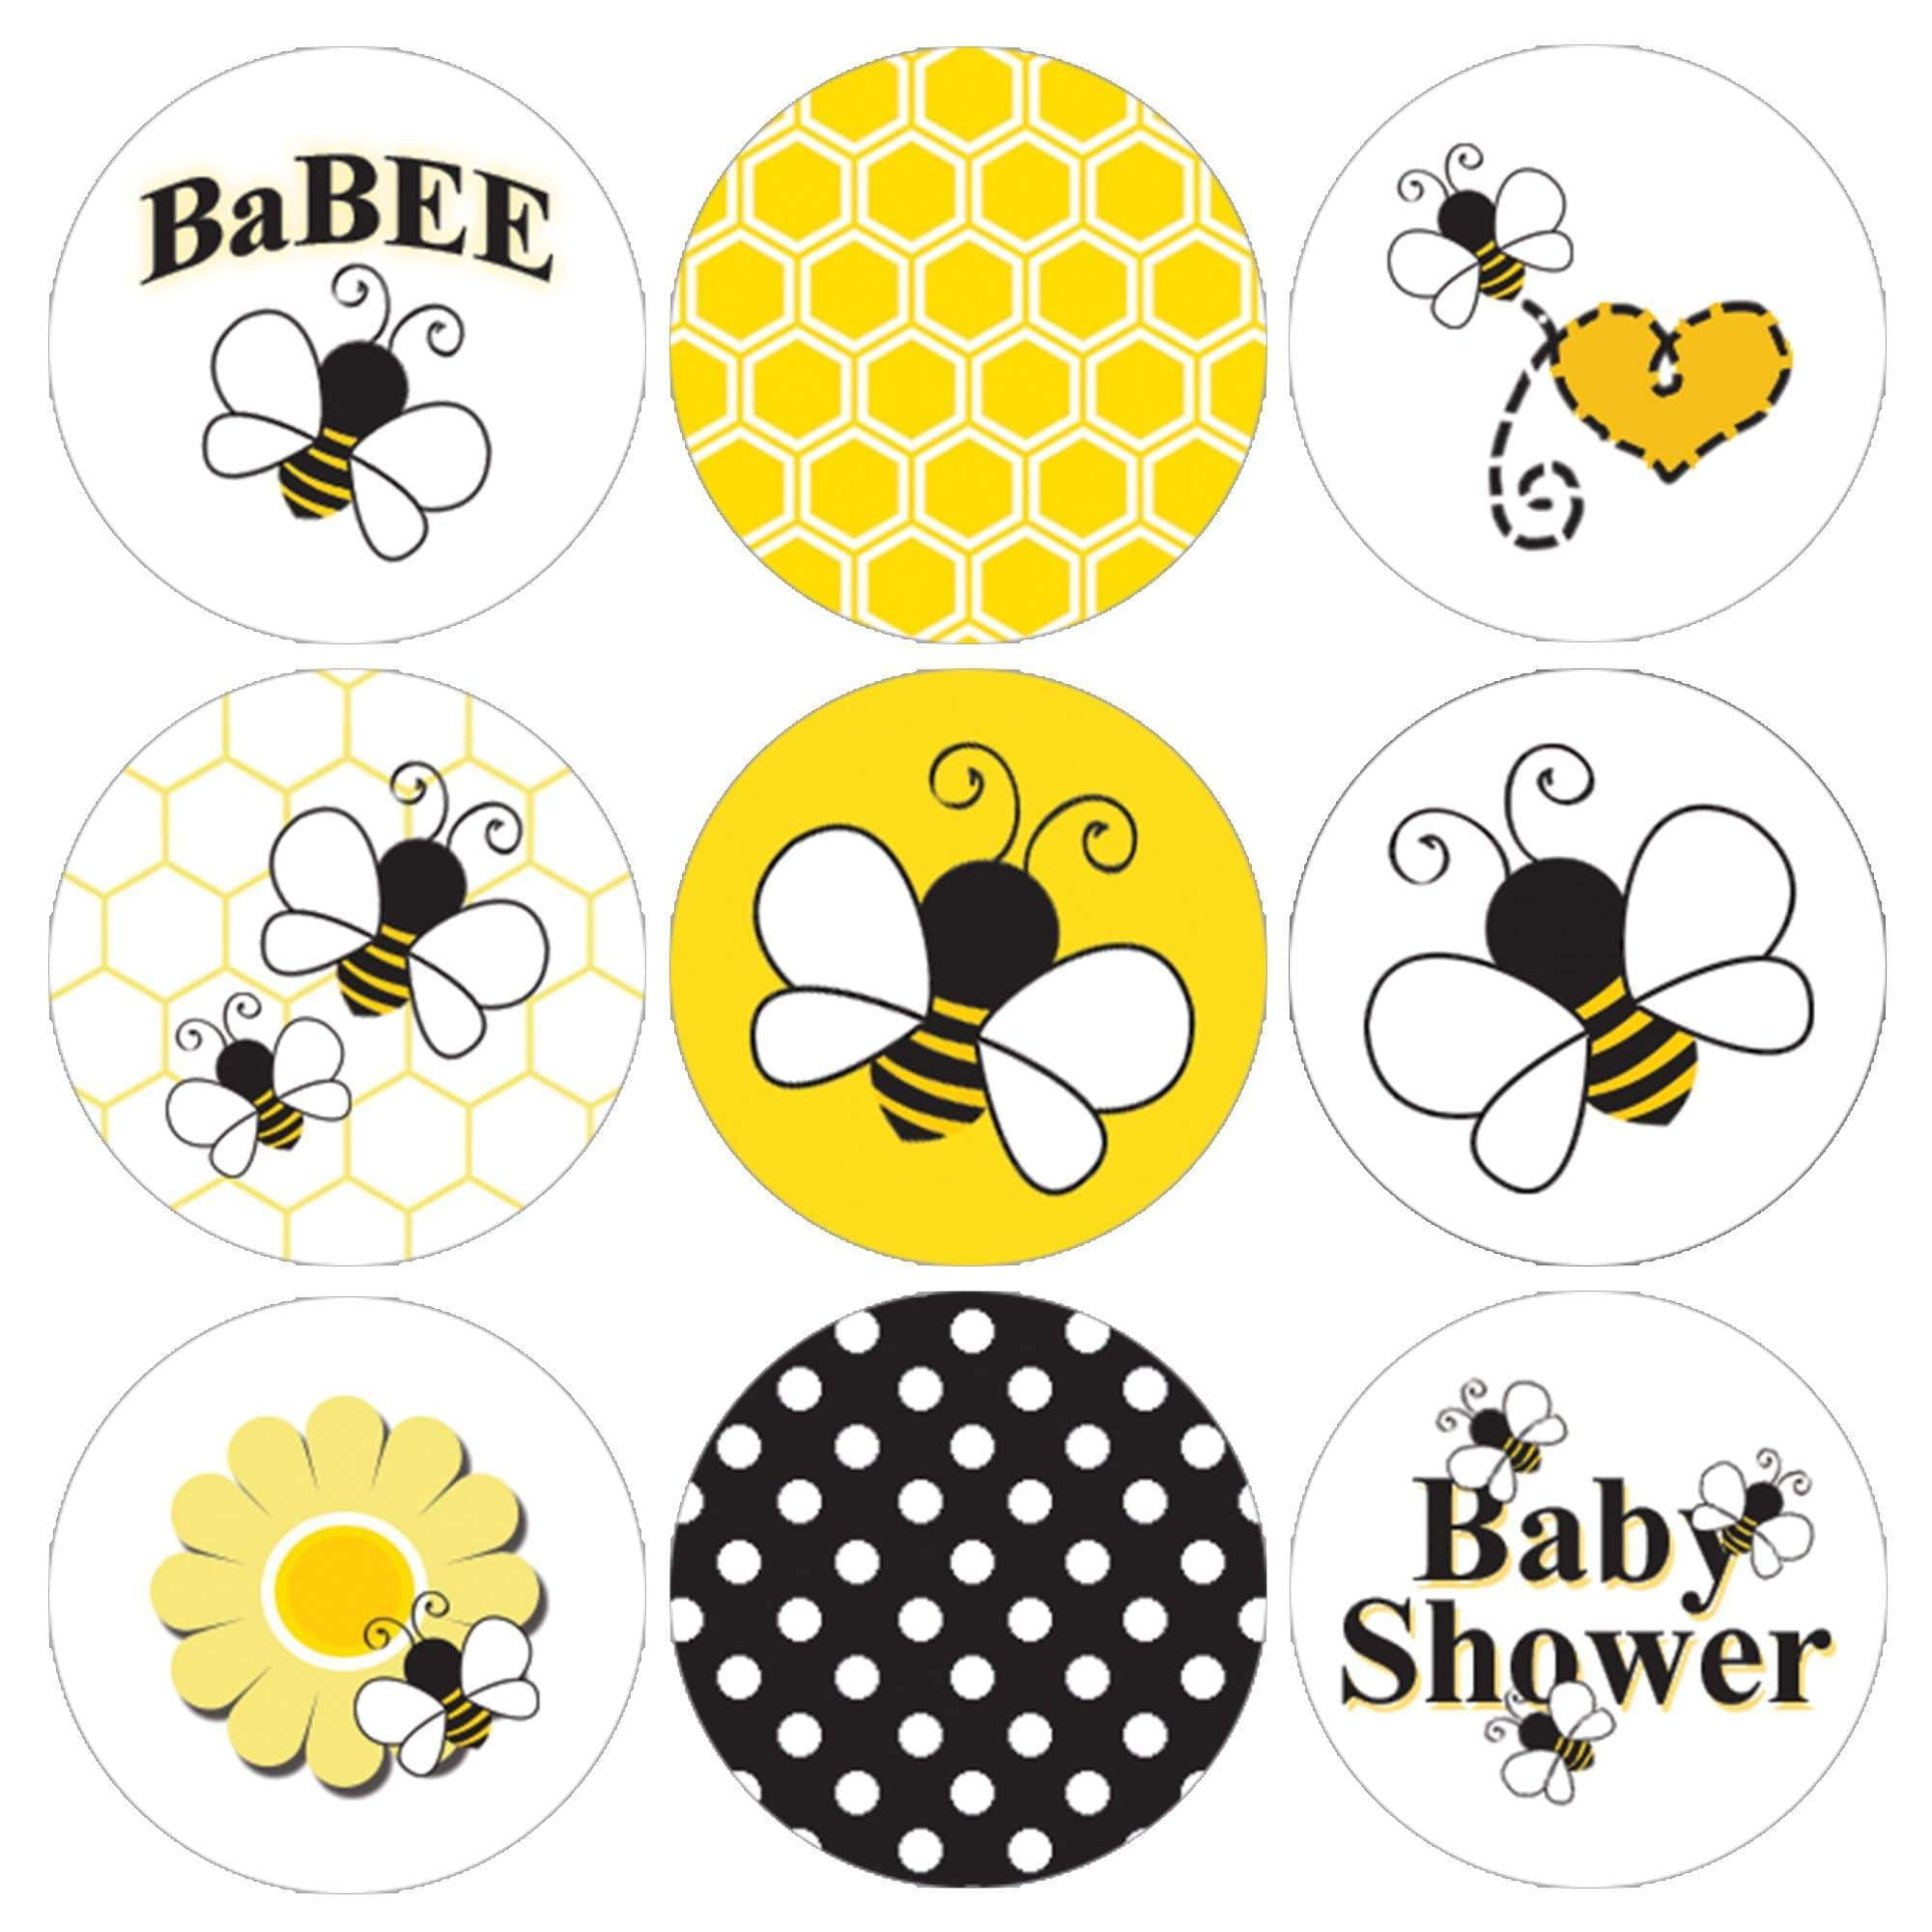 Bride To Bee Confetti Baby To Bee Gold Glitter Bumble Bee Confetti Set of 335 Pieces Mama To Bee 